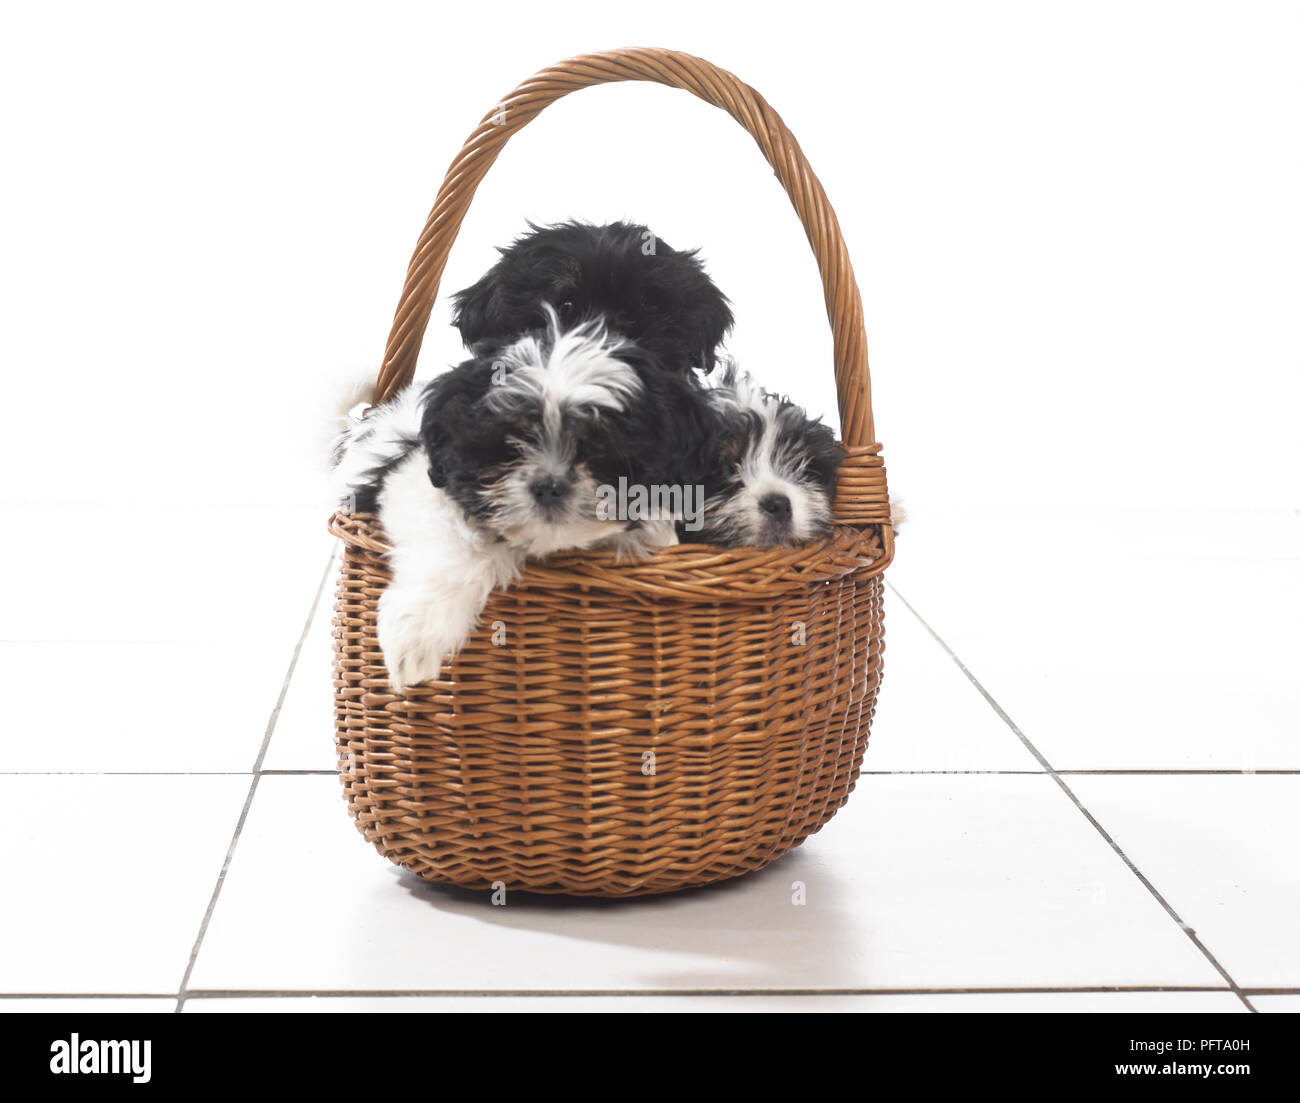 Three black and white puppies sitting in wicker basket Stock Photo